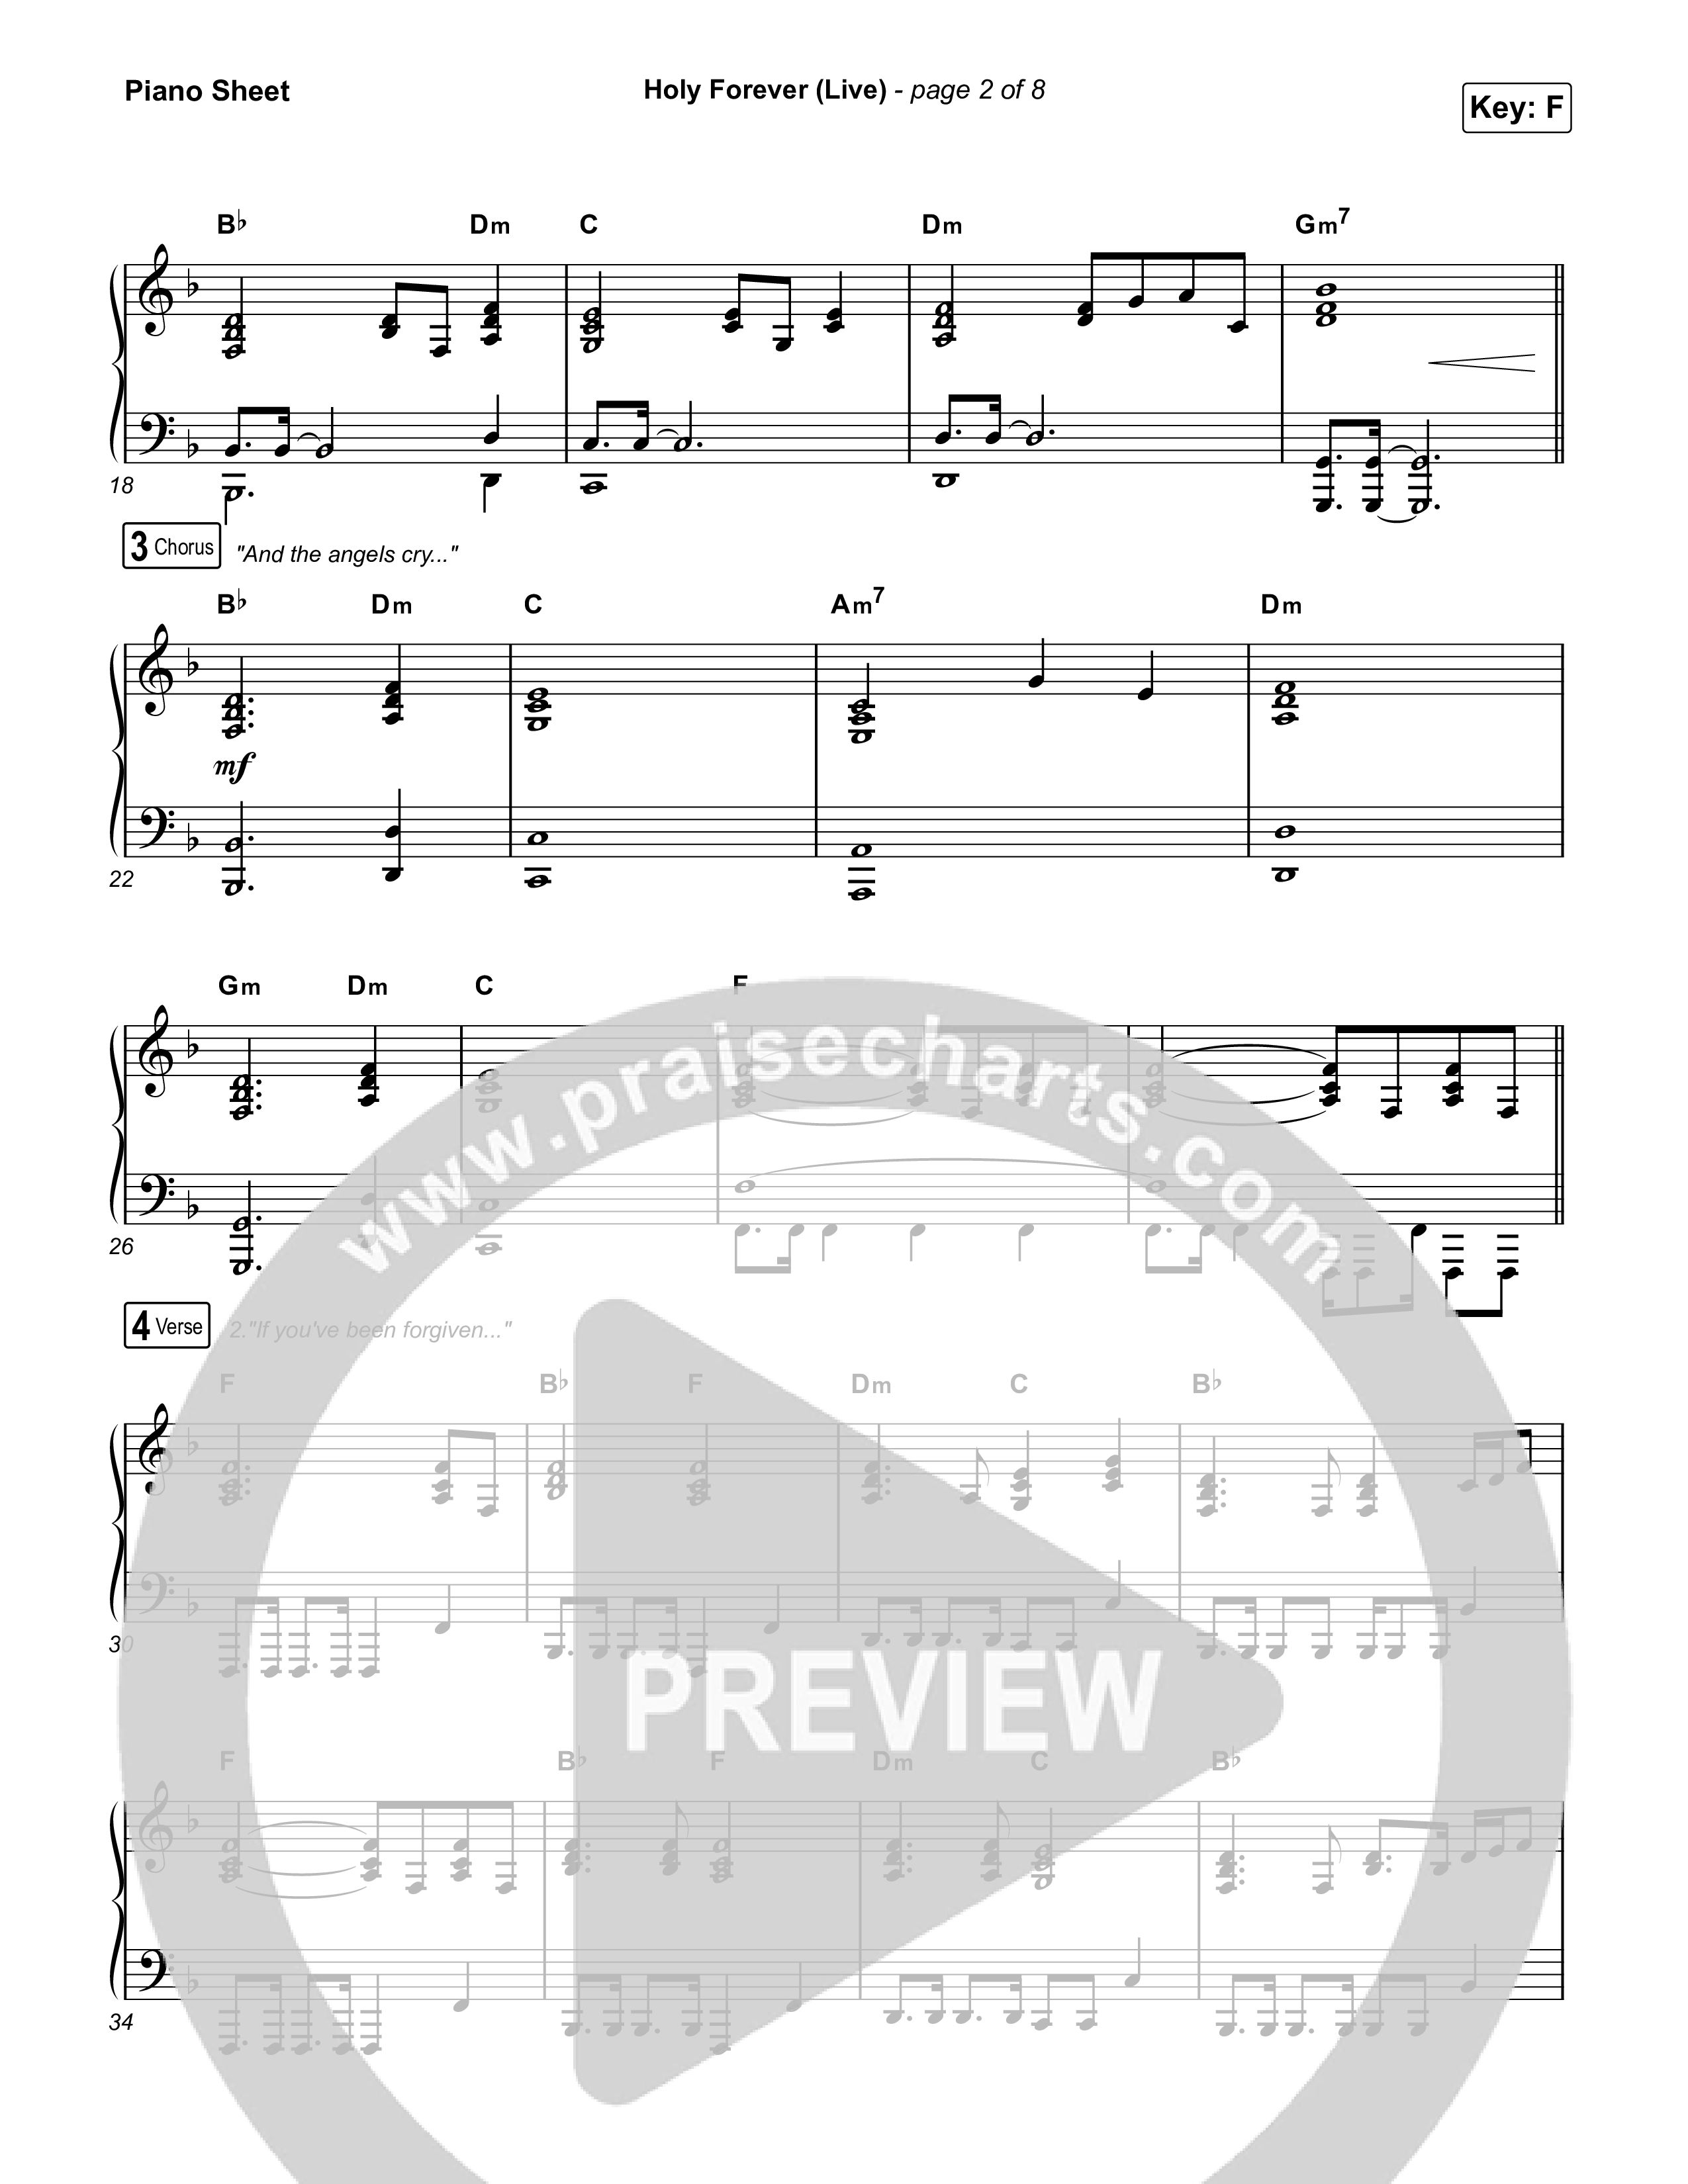 Holy Forever (Live) Piano Sheet (CeCe Winans)